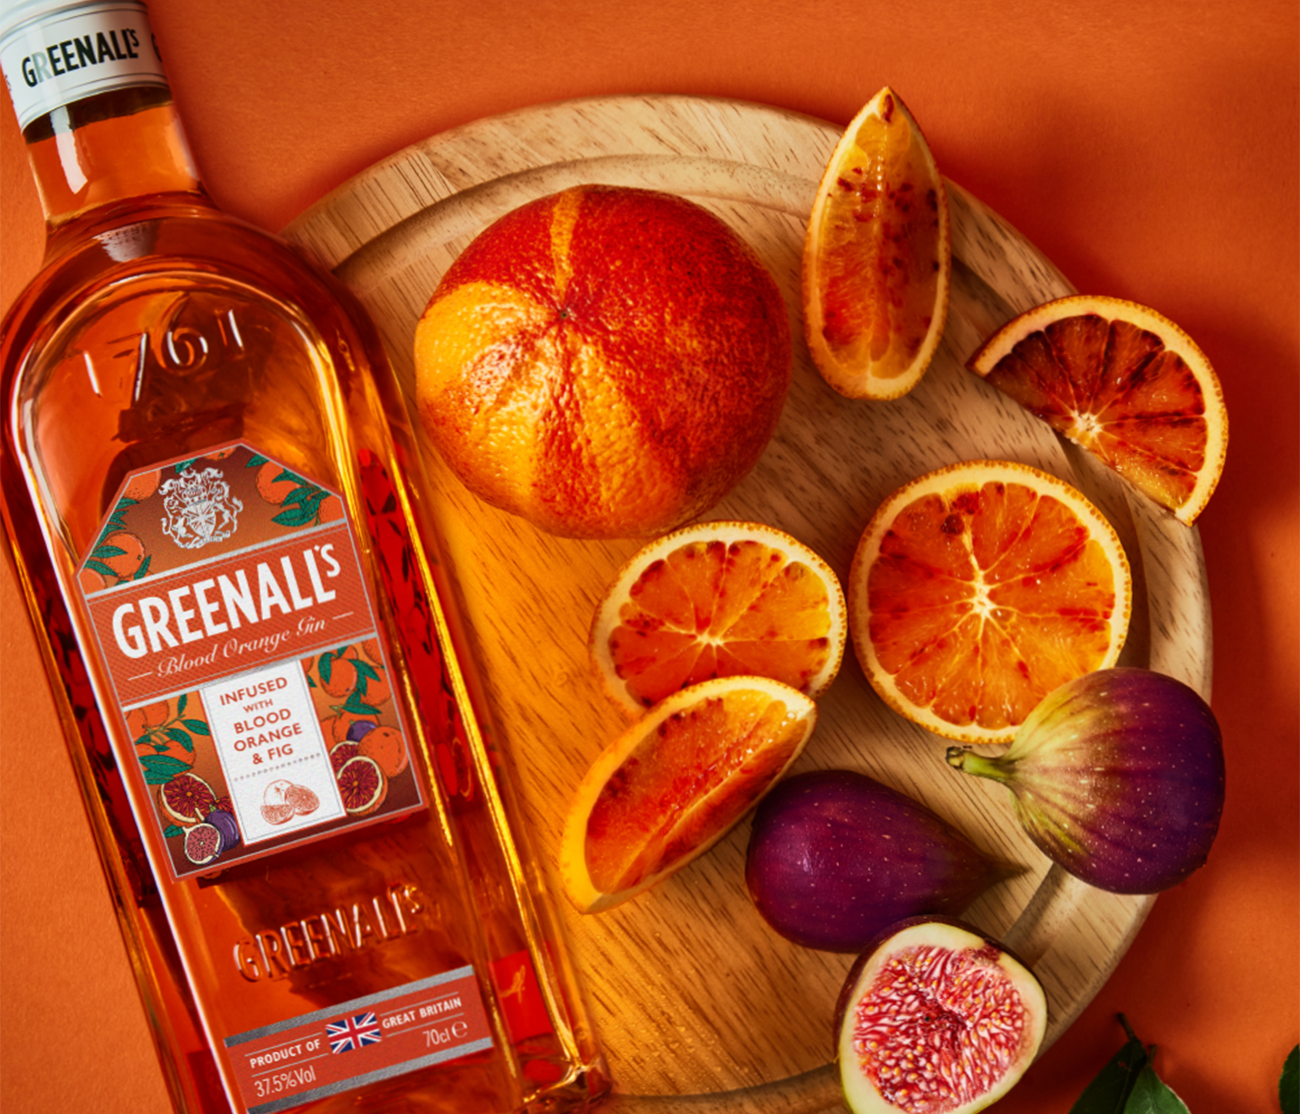 greenalls-blood-orange-and-fig-gin-lifestyle-new (3).png